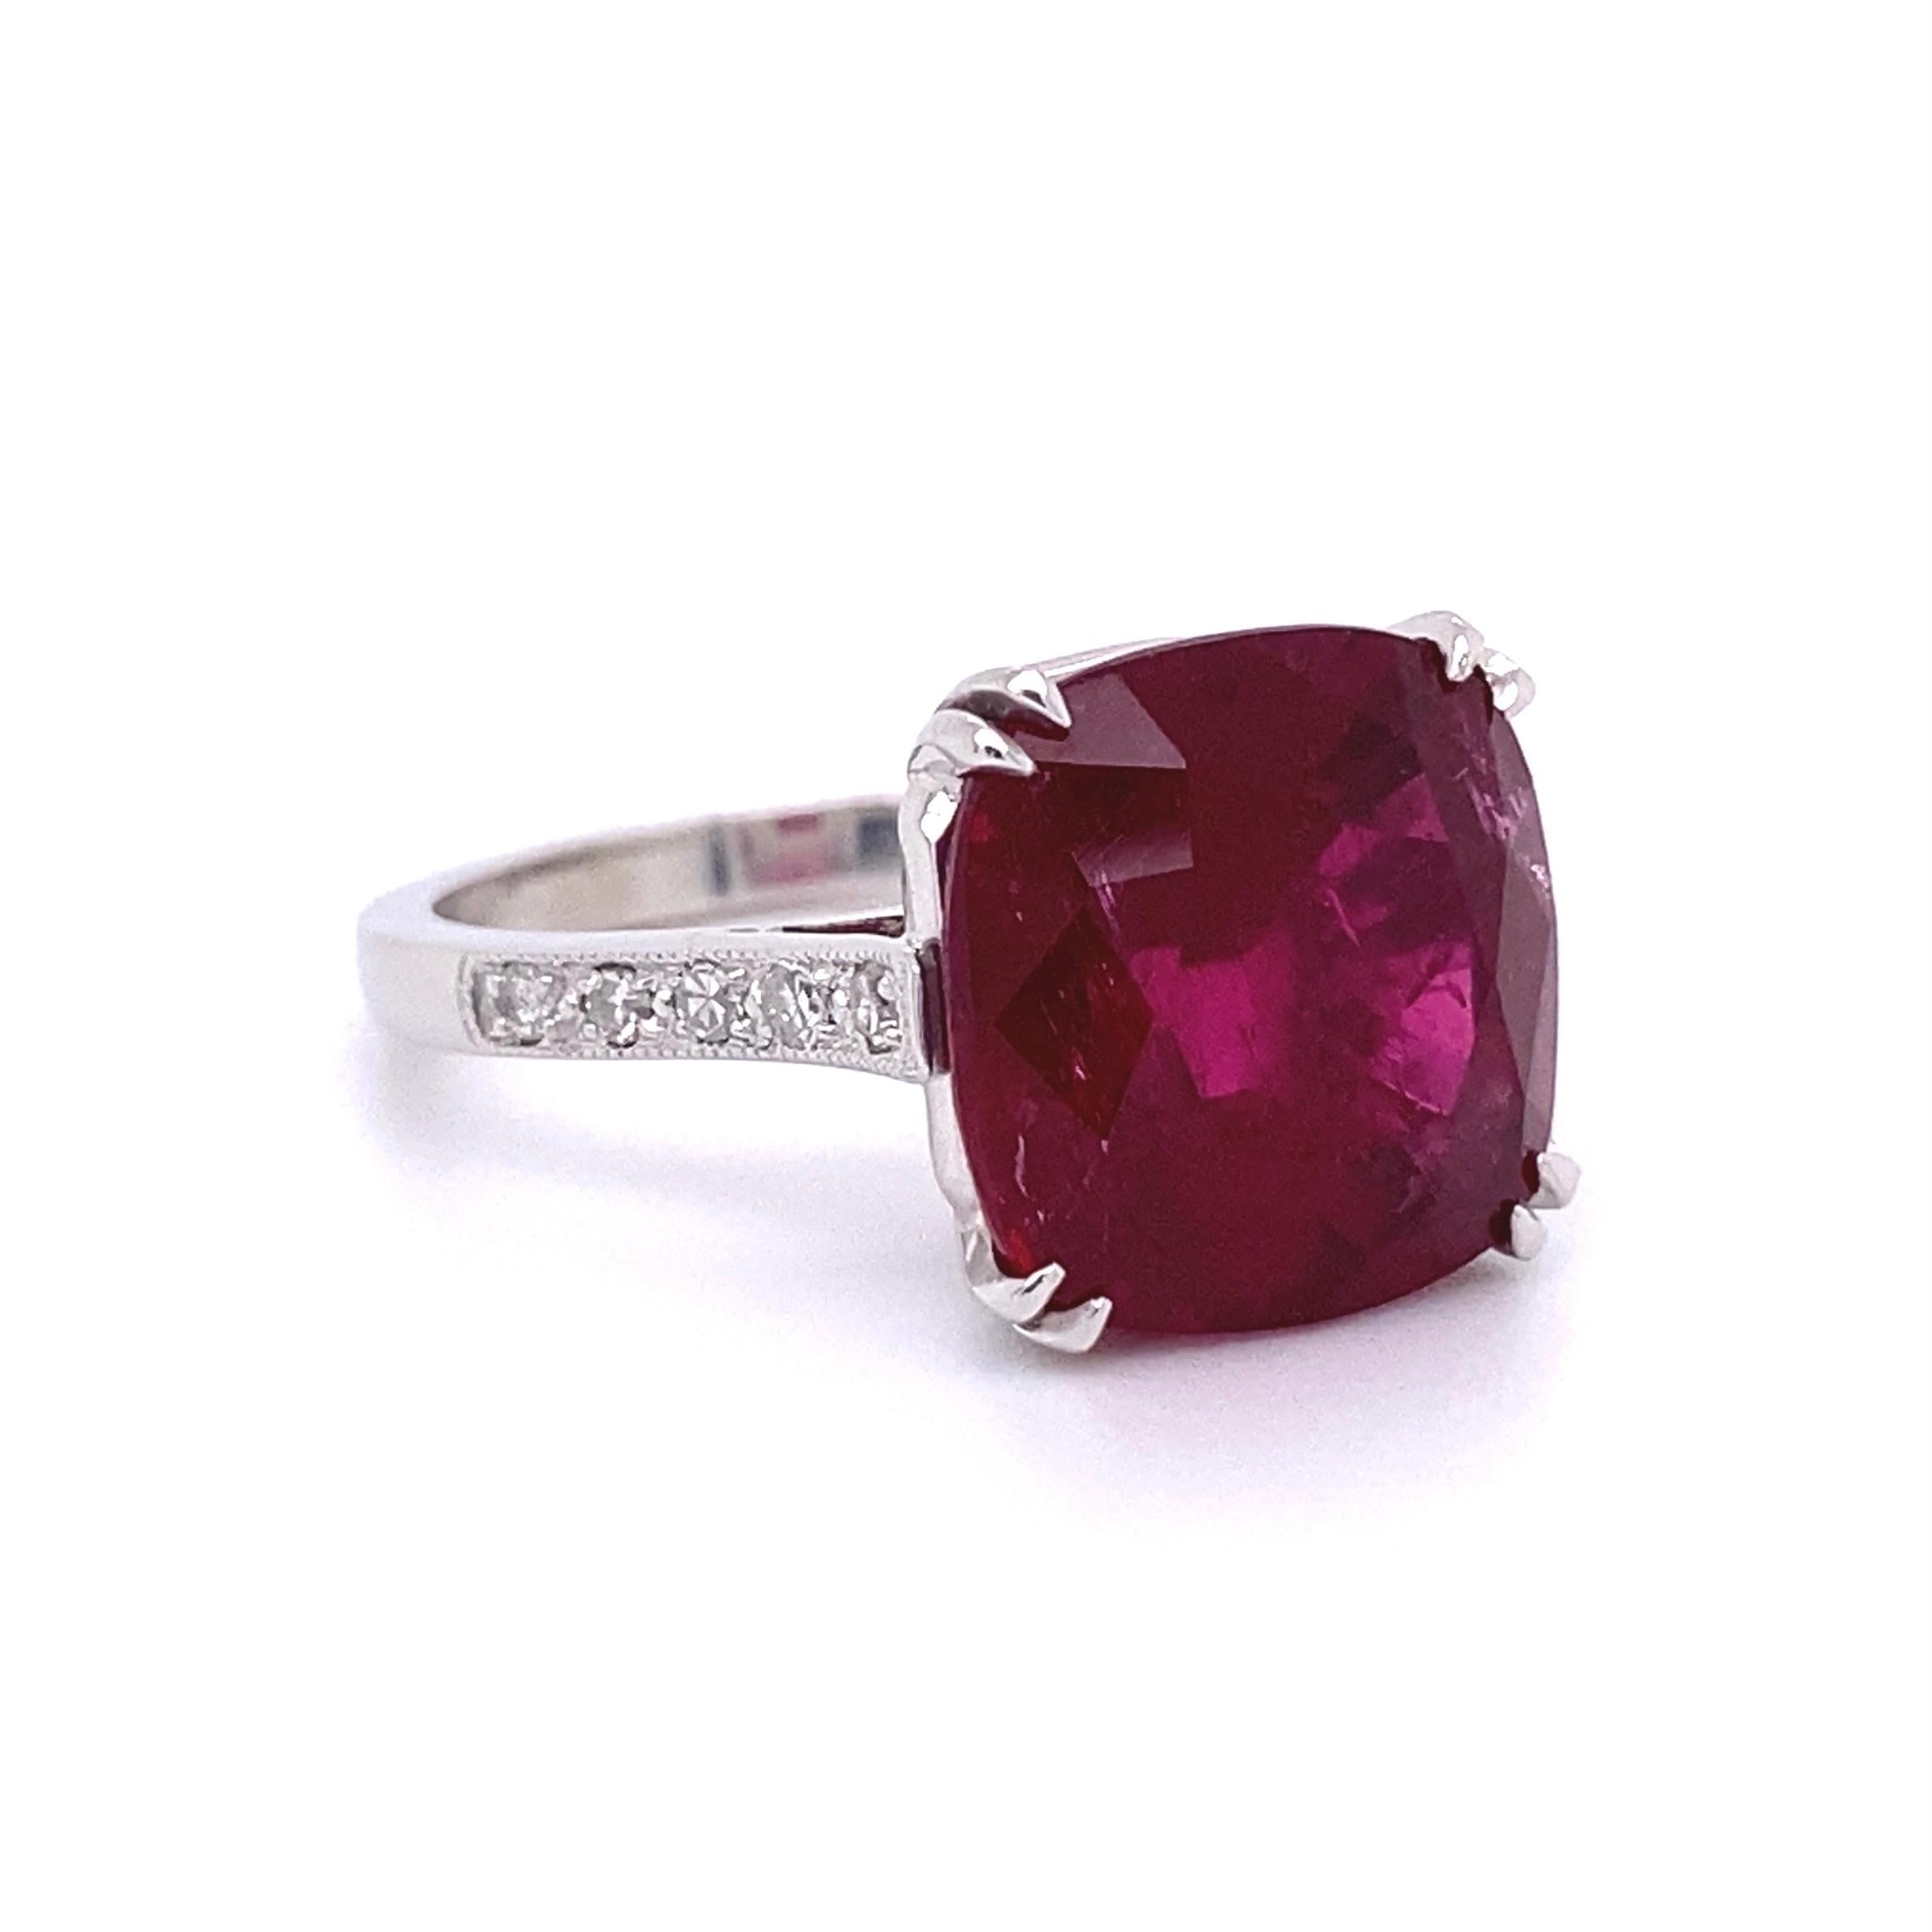 Beautiful and finely detailed Cocktail Ring center Hand set with a securely nestled 6.98 Carat Cushion-cut Rubelite Tourmaline and enhanced with Diamonds on either side. Dimensions 0.79”w x 0.47”h x 1.06” d. Hand crafted in Platinum. In excellent